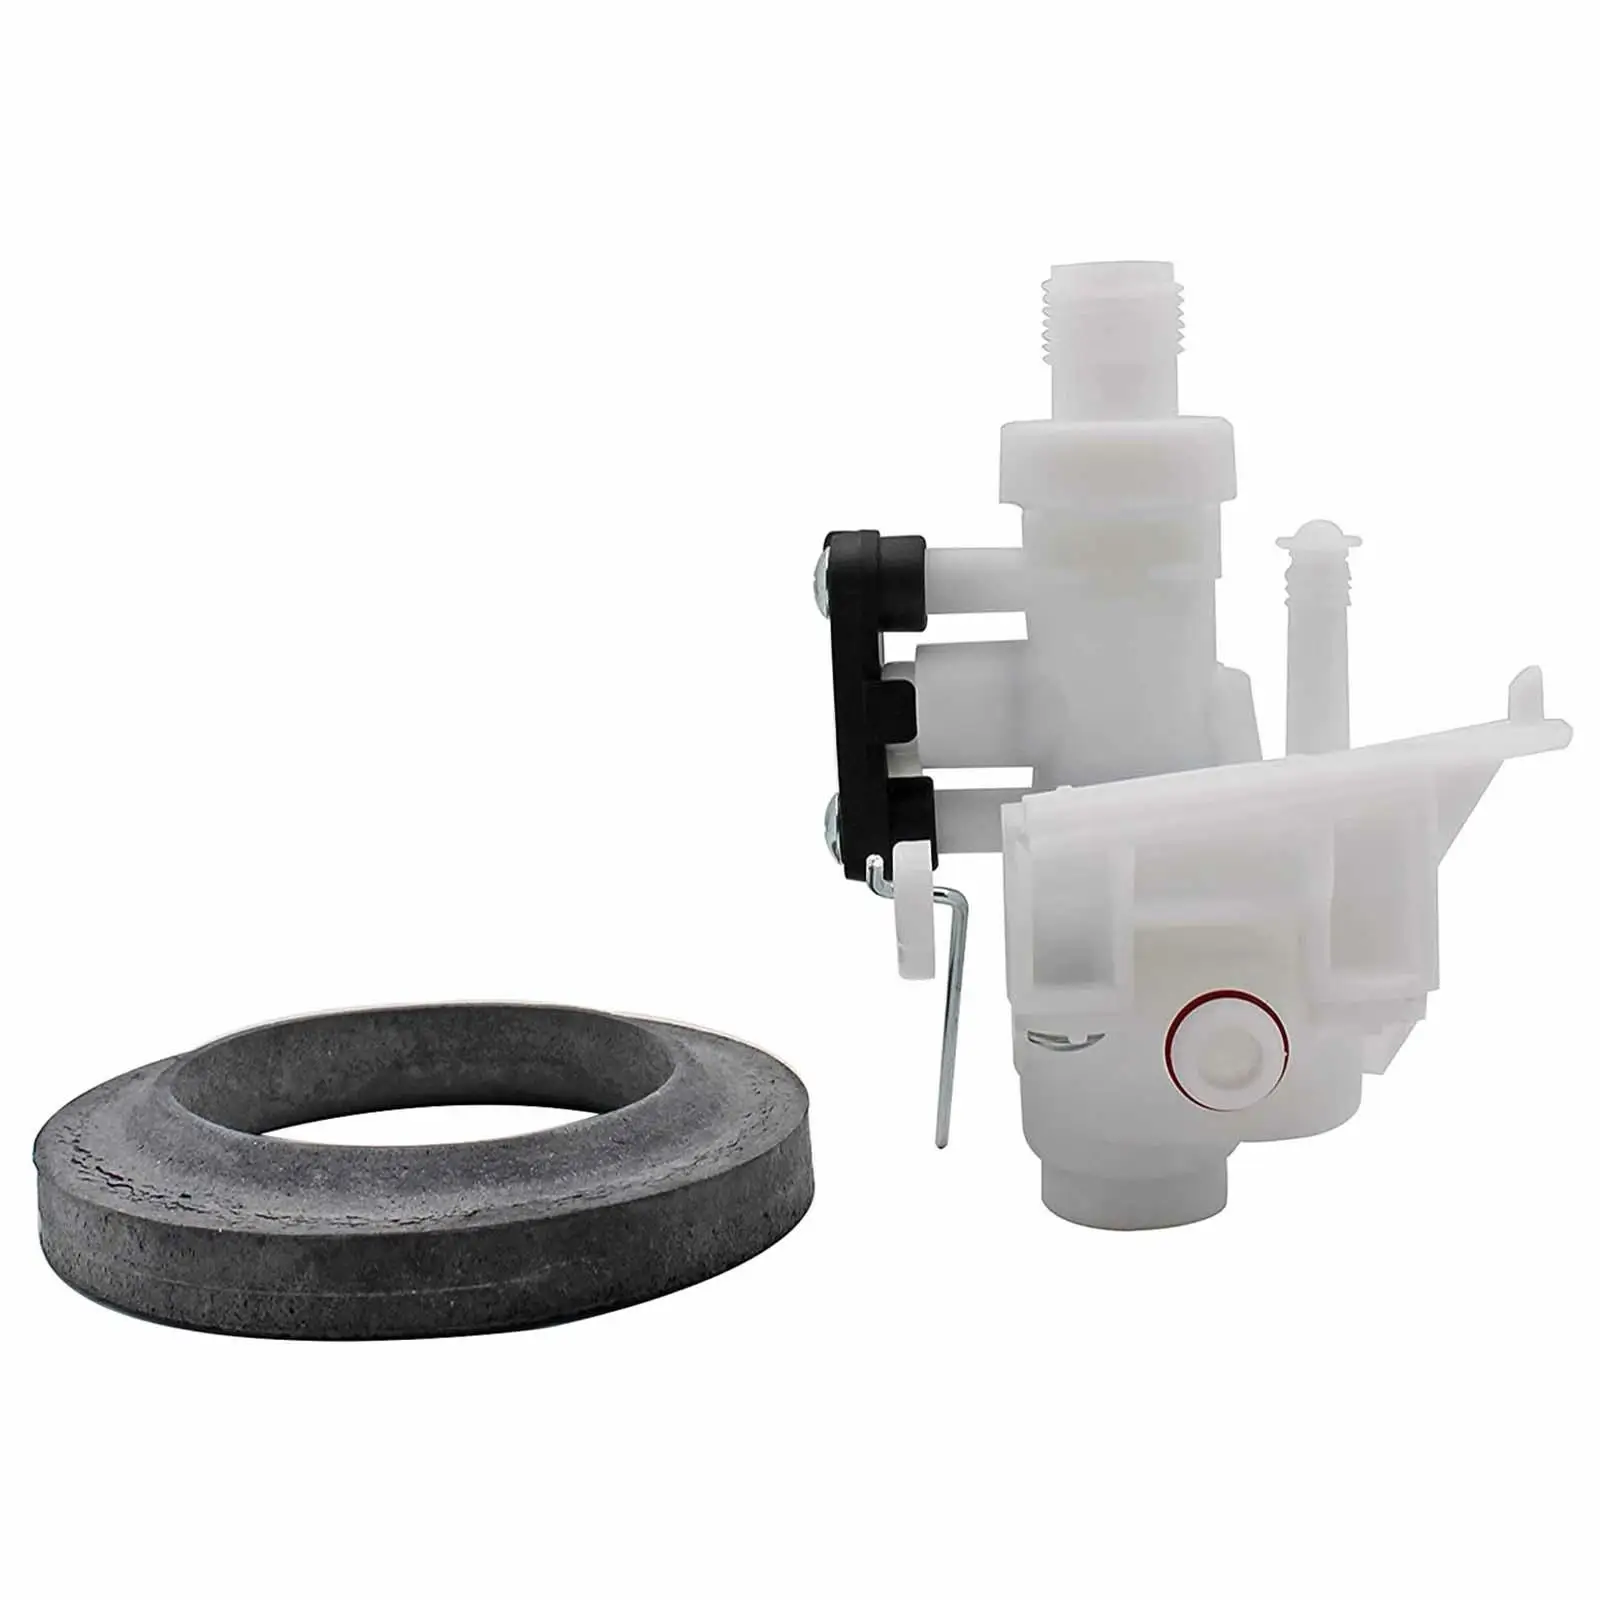 31705 Water Valve with Seal Easy to Install Convenient Camper Trailer Toilet Repair Kits for Motor Home Accessory Replacements